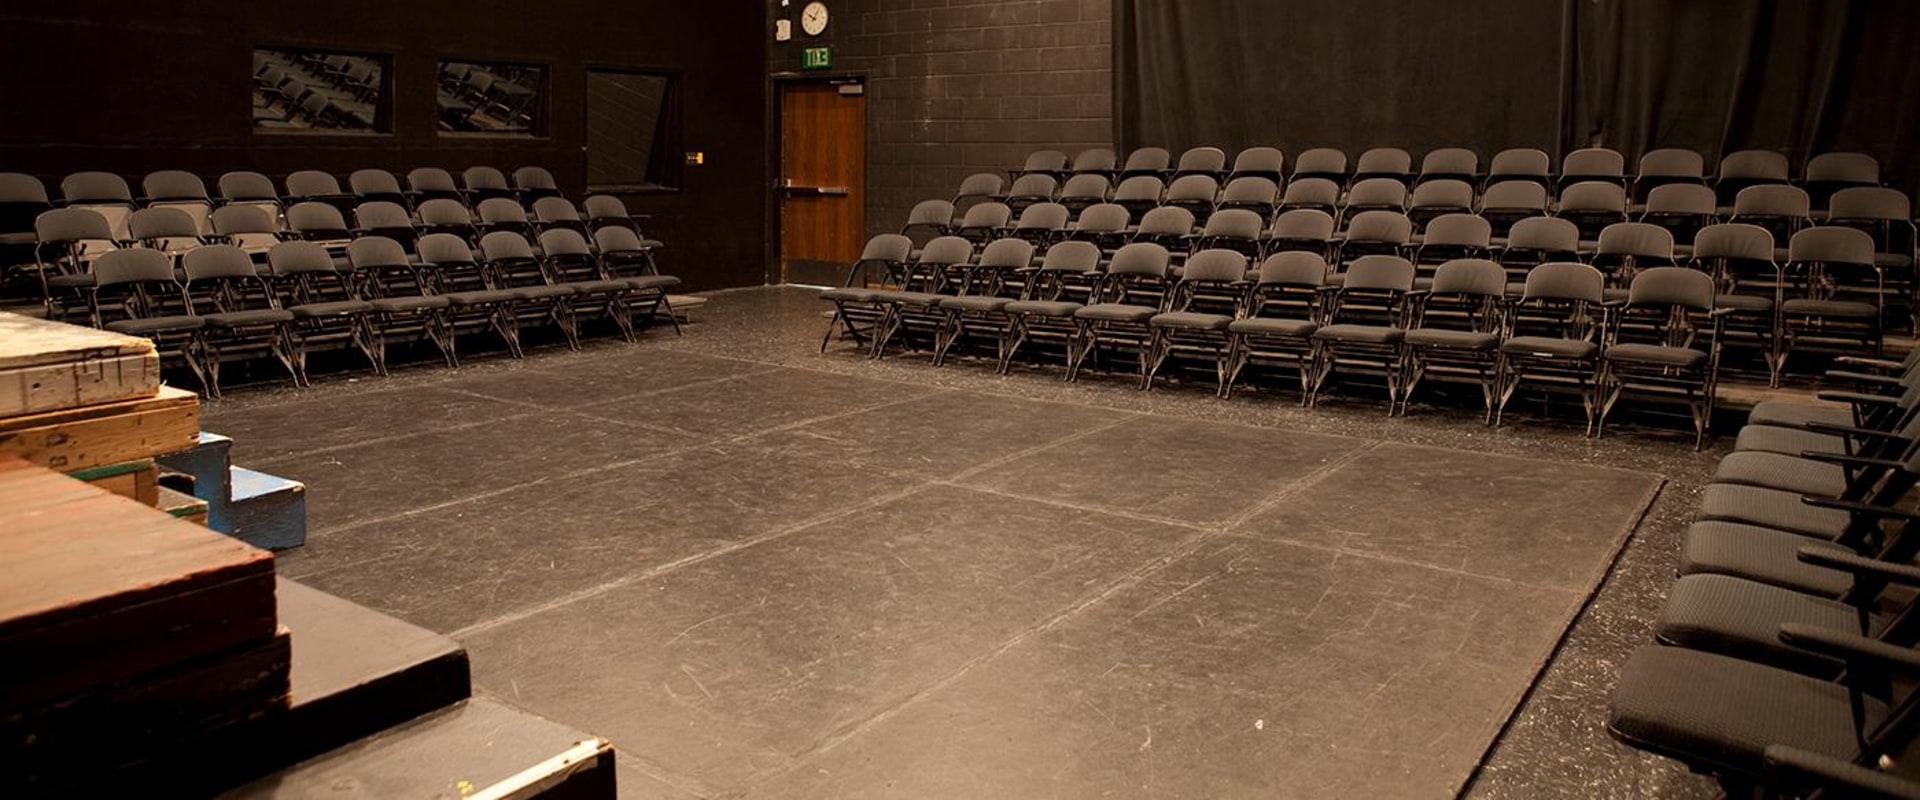 Theatre Accessibility in South Jordan, UT: A Guide to Accessible Seating Options